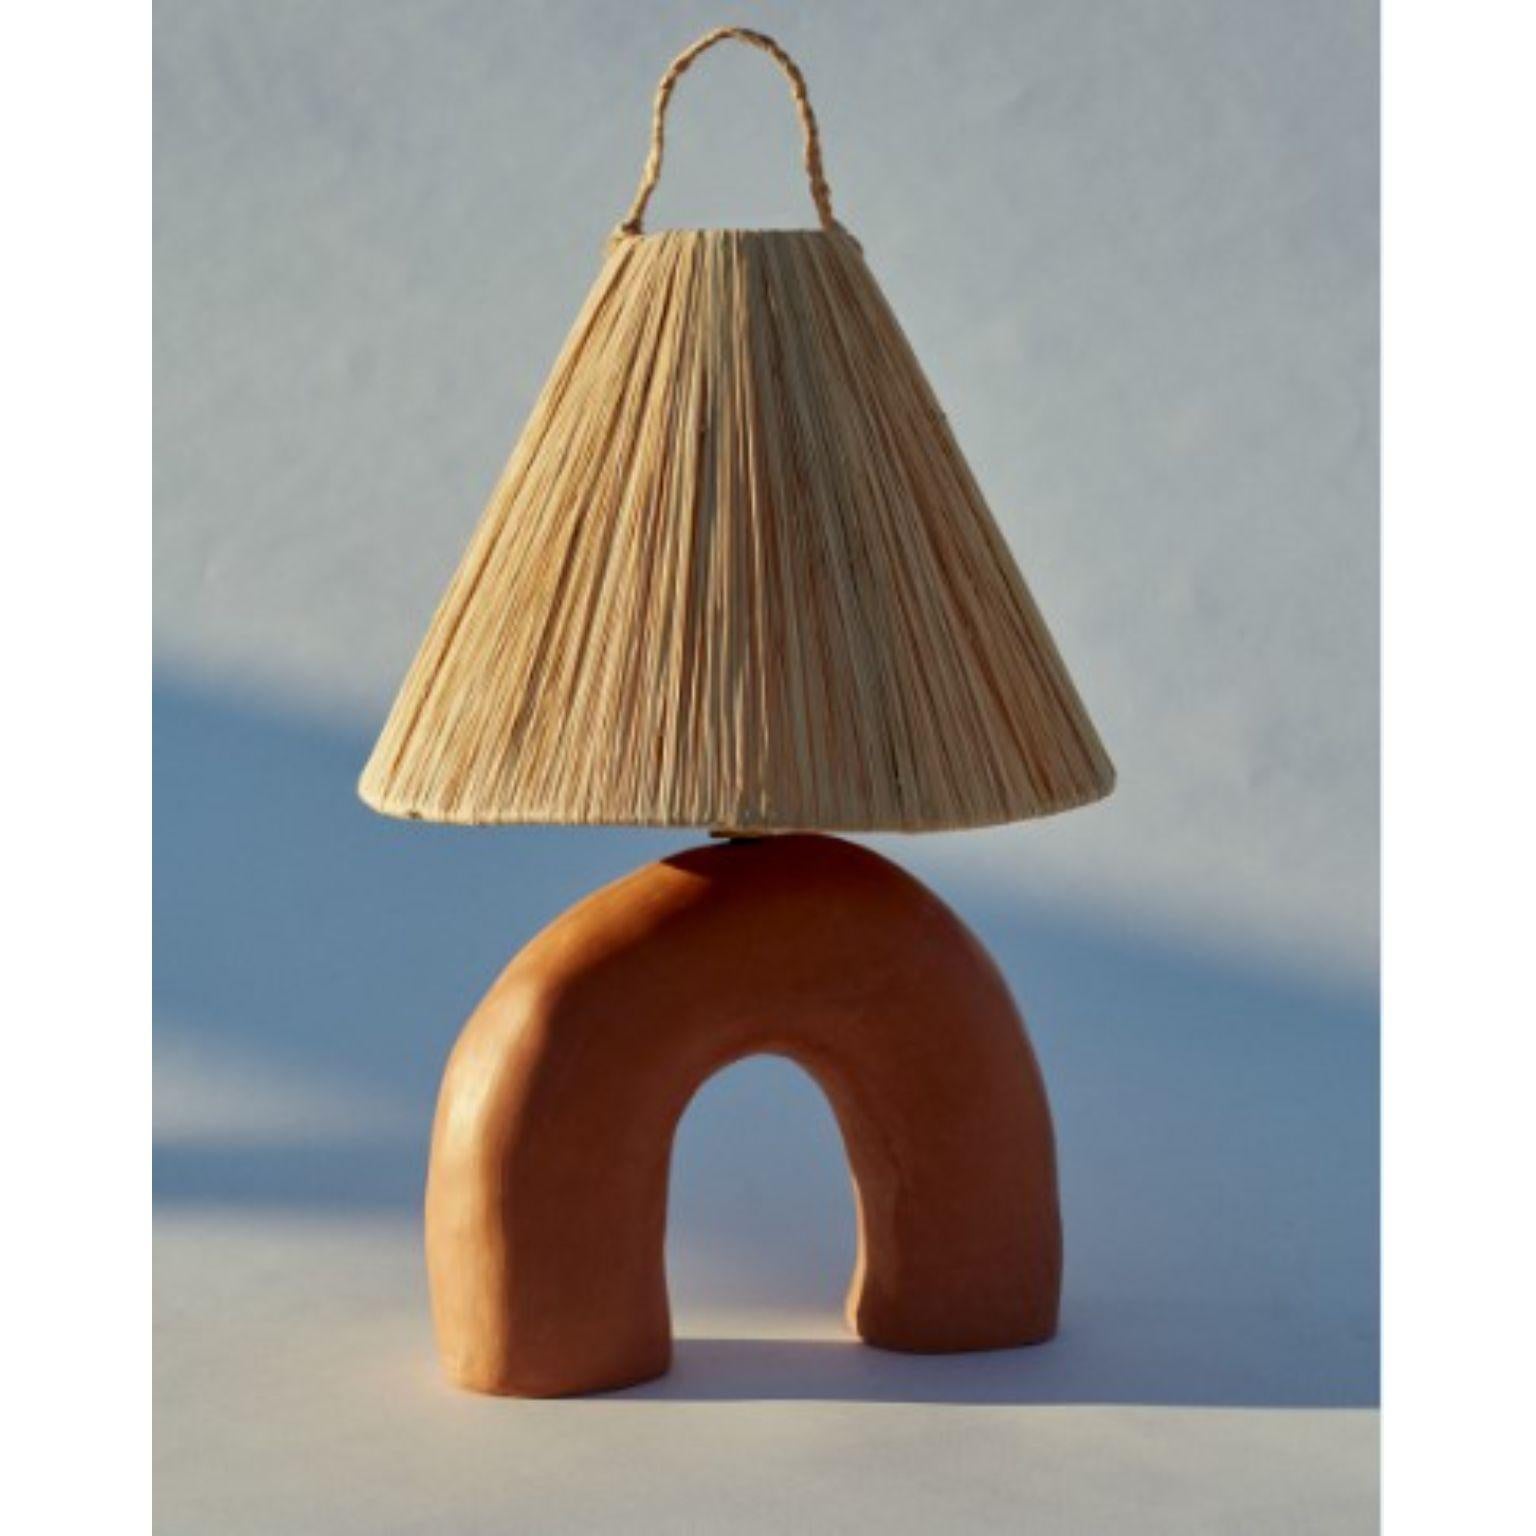 Volta lamp in terracotta by Marta Bonilla
Dimensions: D28 x H41 cm
Materials: Terracotta, clay.

Volta lamp in terracotta: Piece modeled by hand in red clay. The piece has a burnished finish, giving it a satin look.

All our lamps can be wired